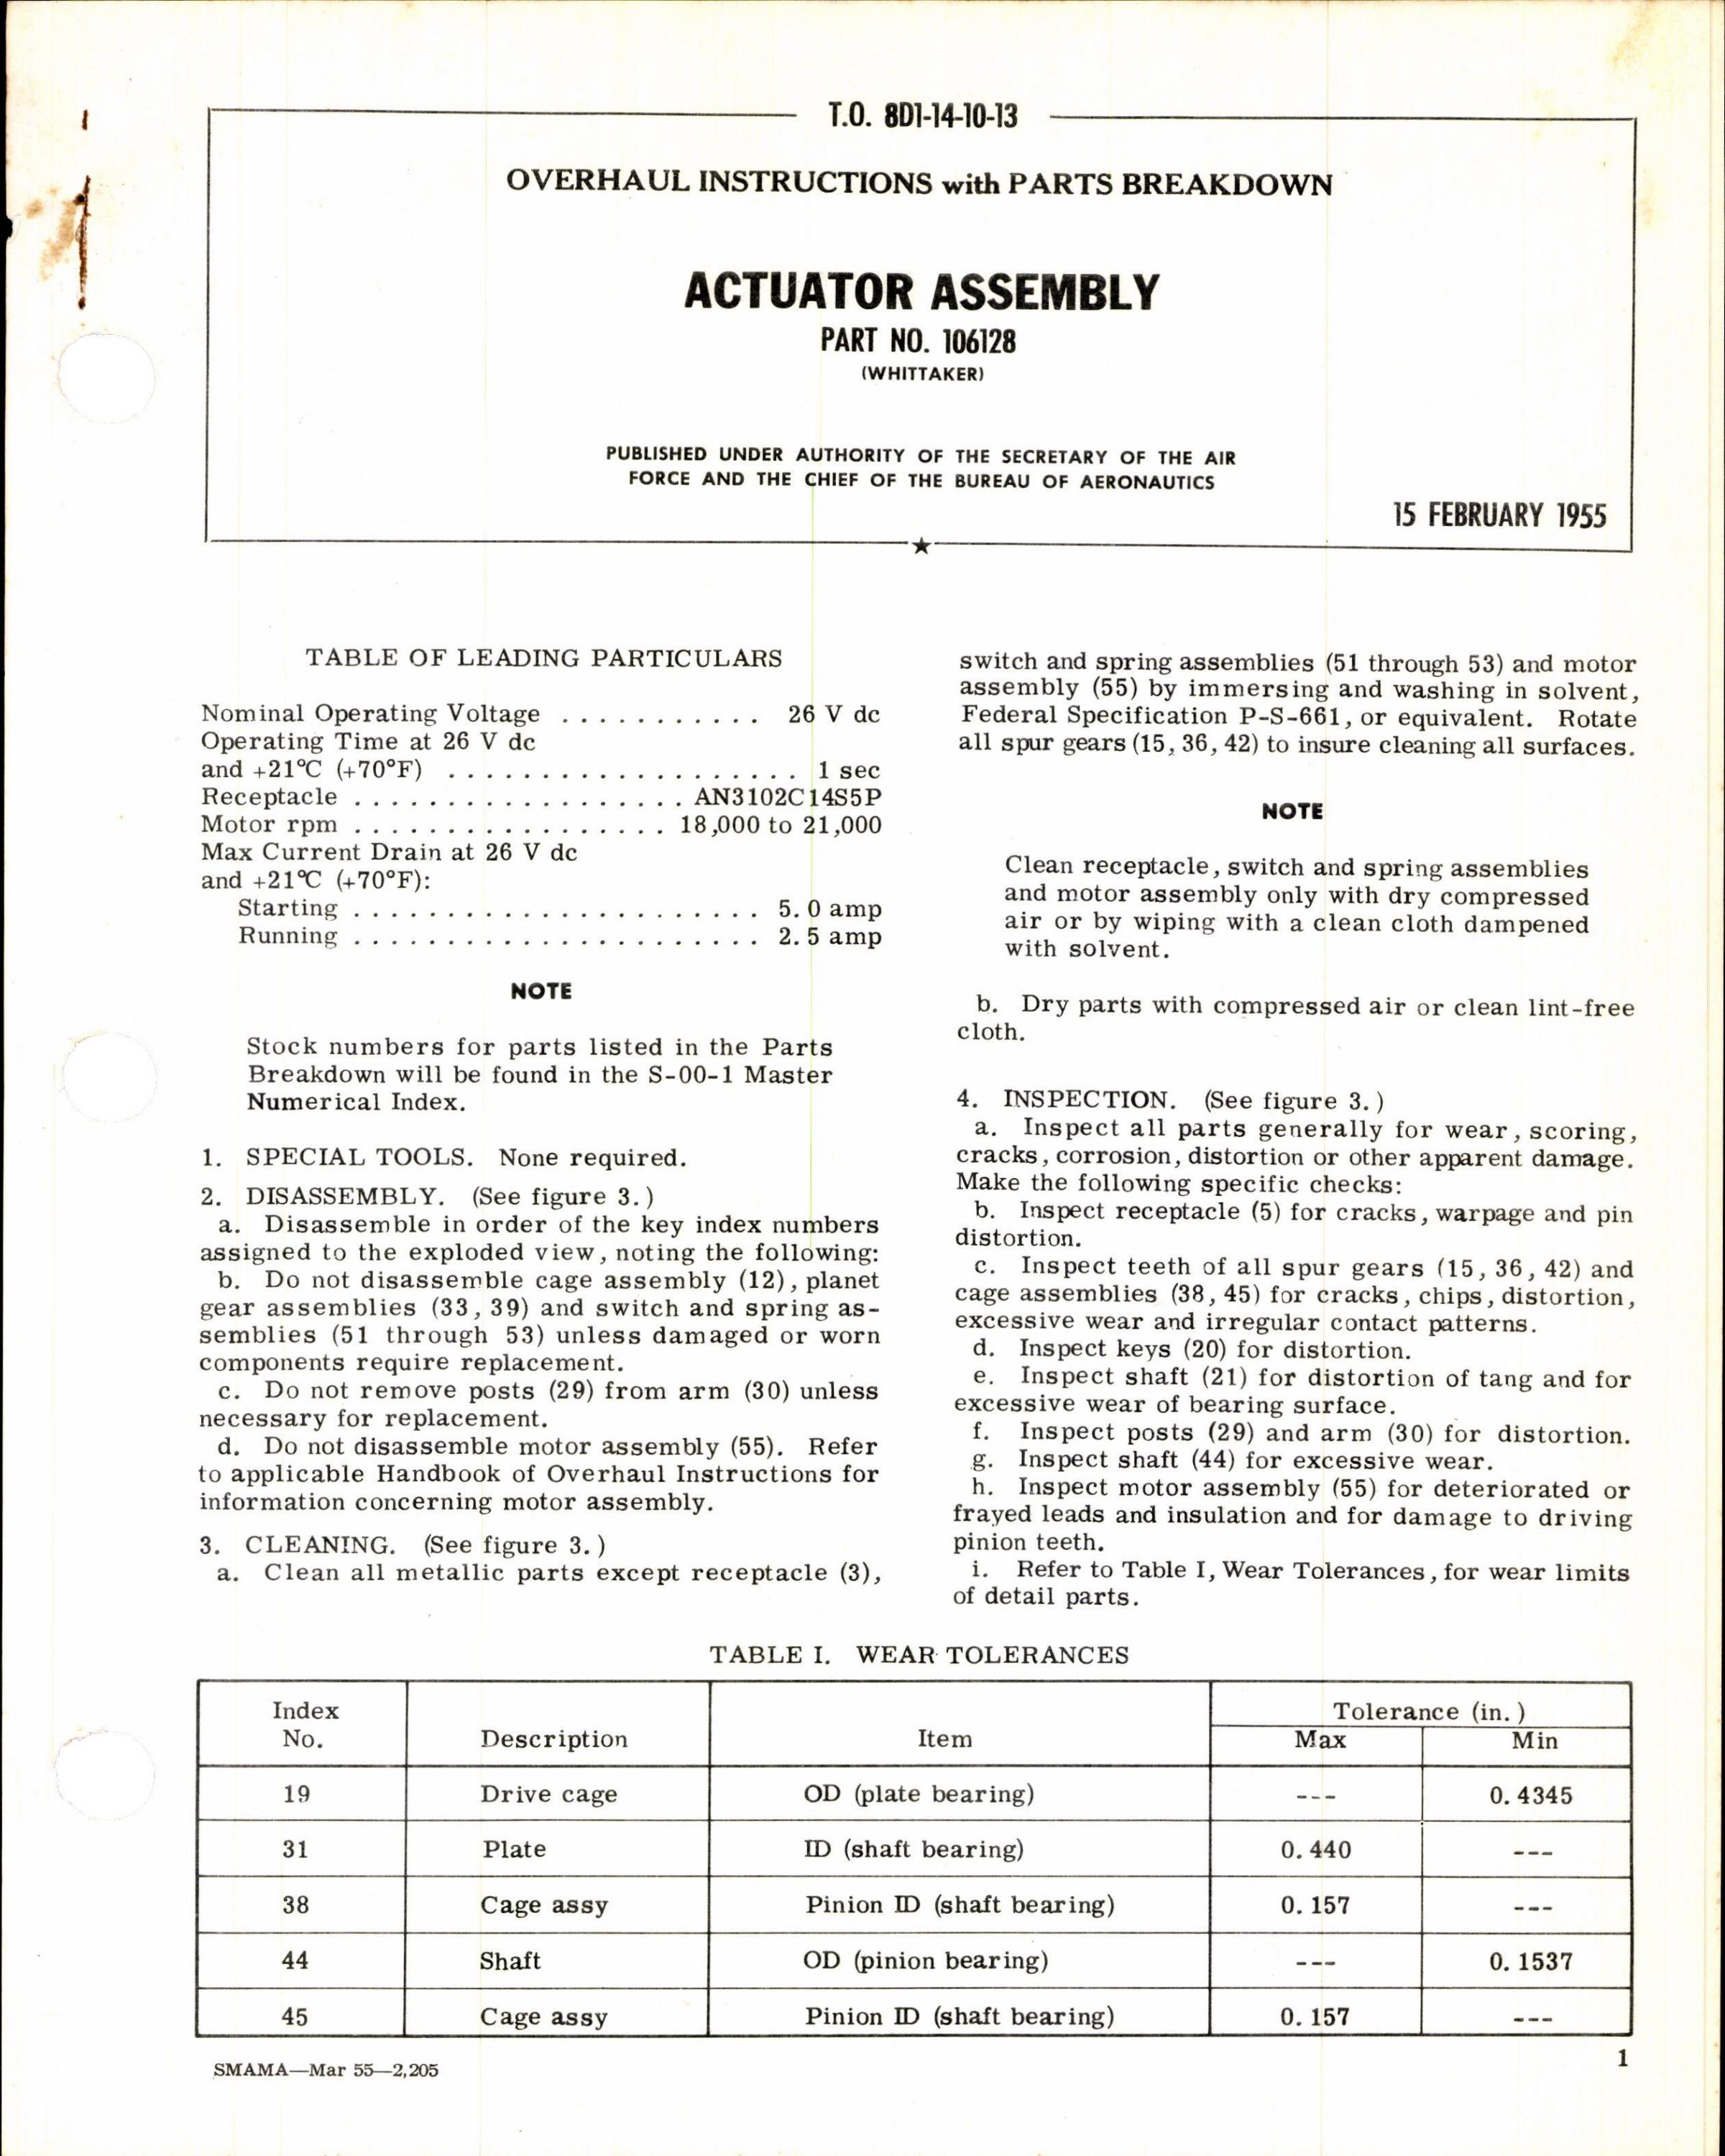 Sample page 1 from AirCorps Library document: Instructions w Parts Breakdown for Actuator Assembly No 106128